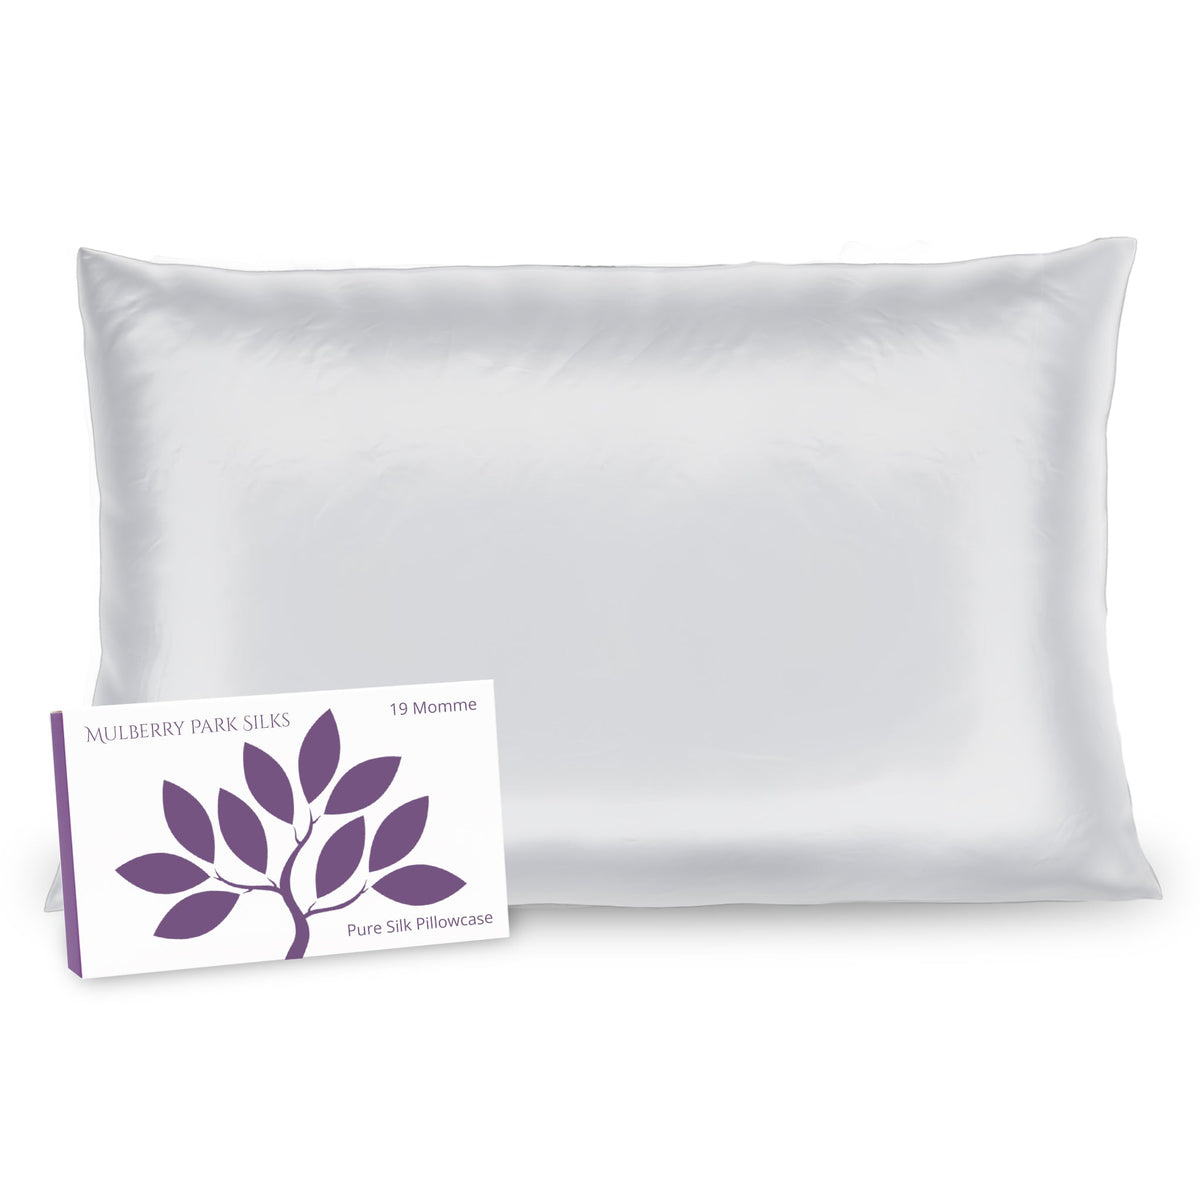 Mulberry Park Silks Deluxe 19 Momme Pure Silk Pillowcase in White Color with Box